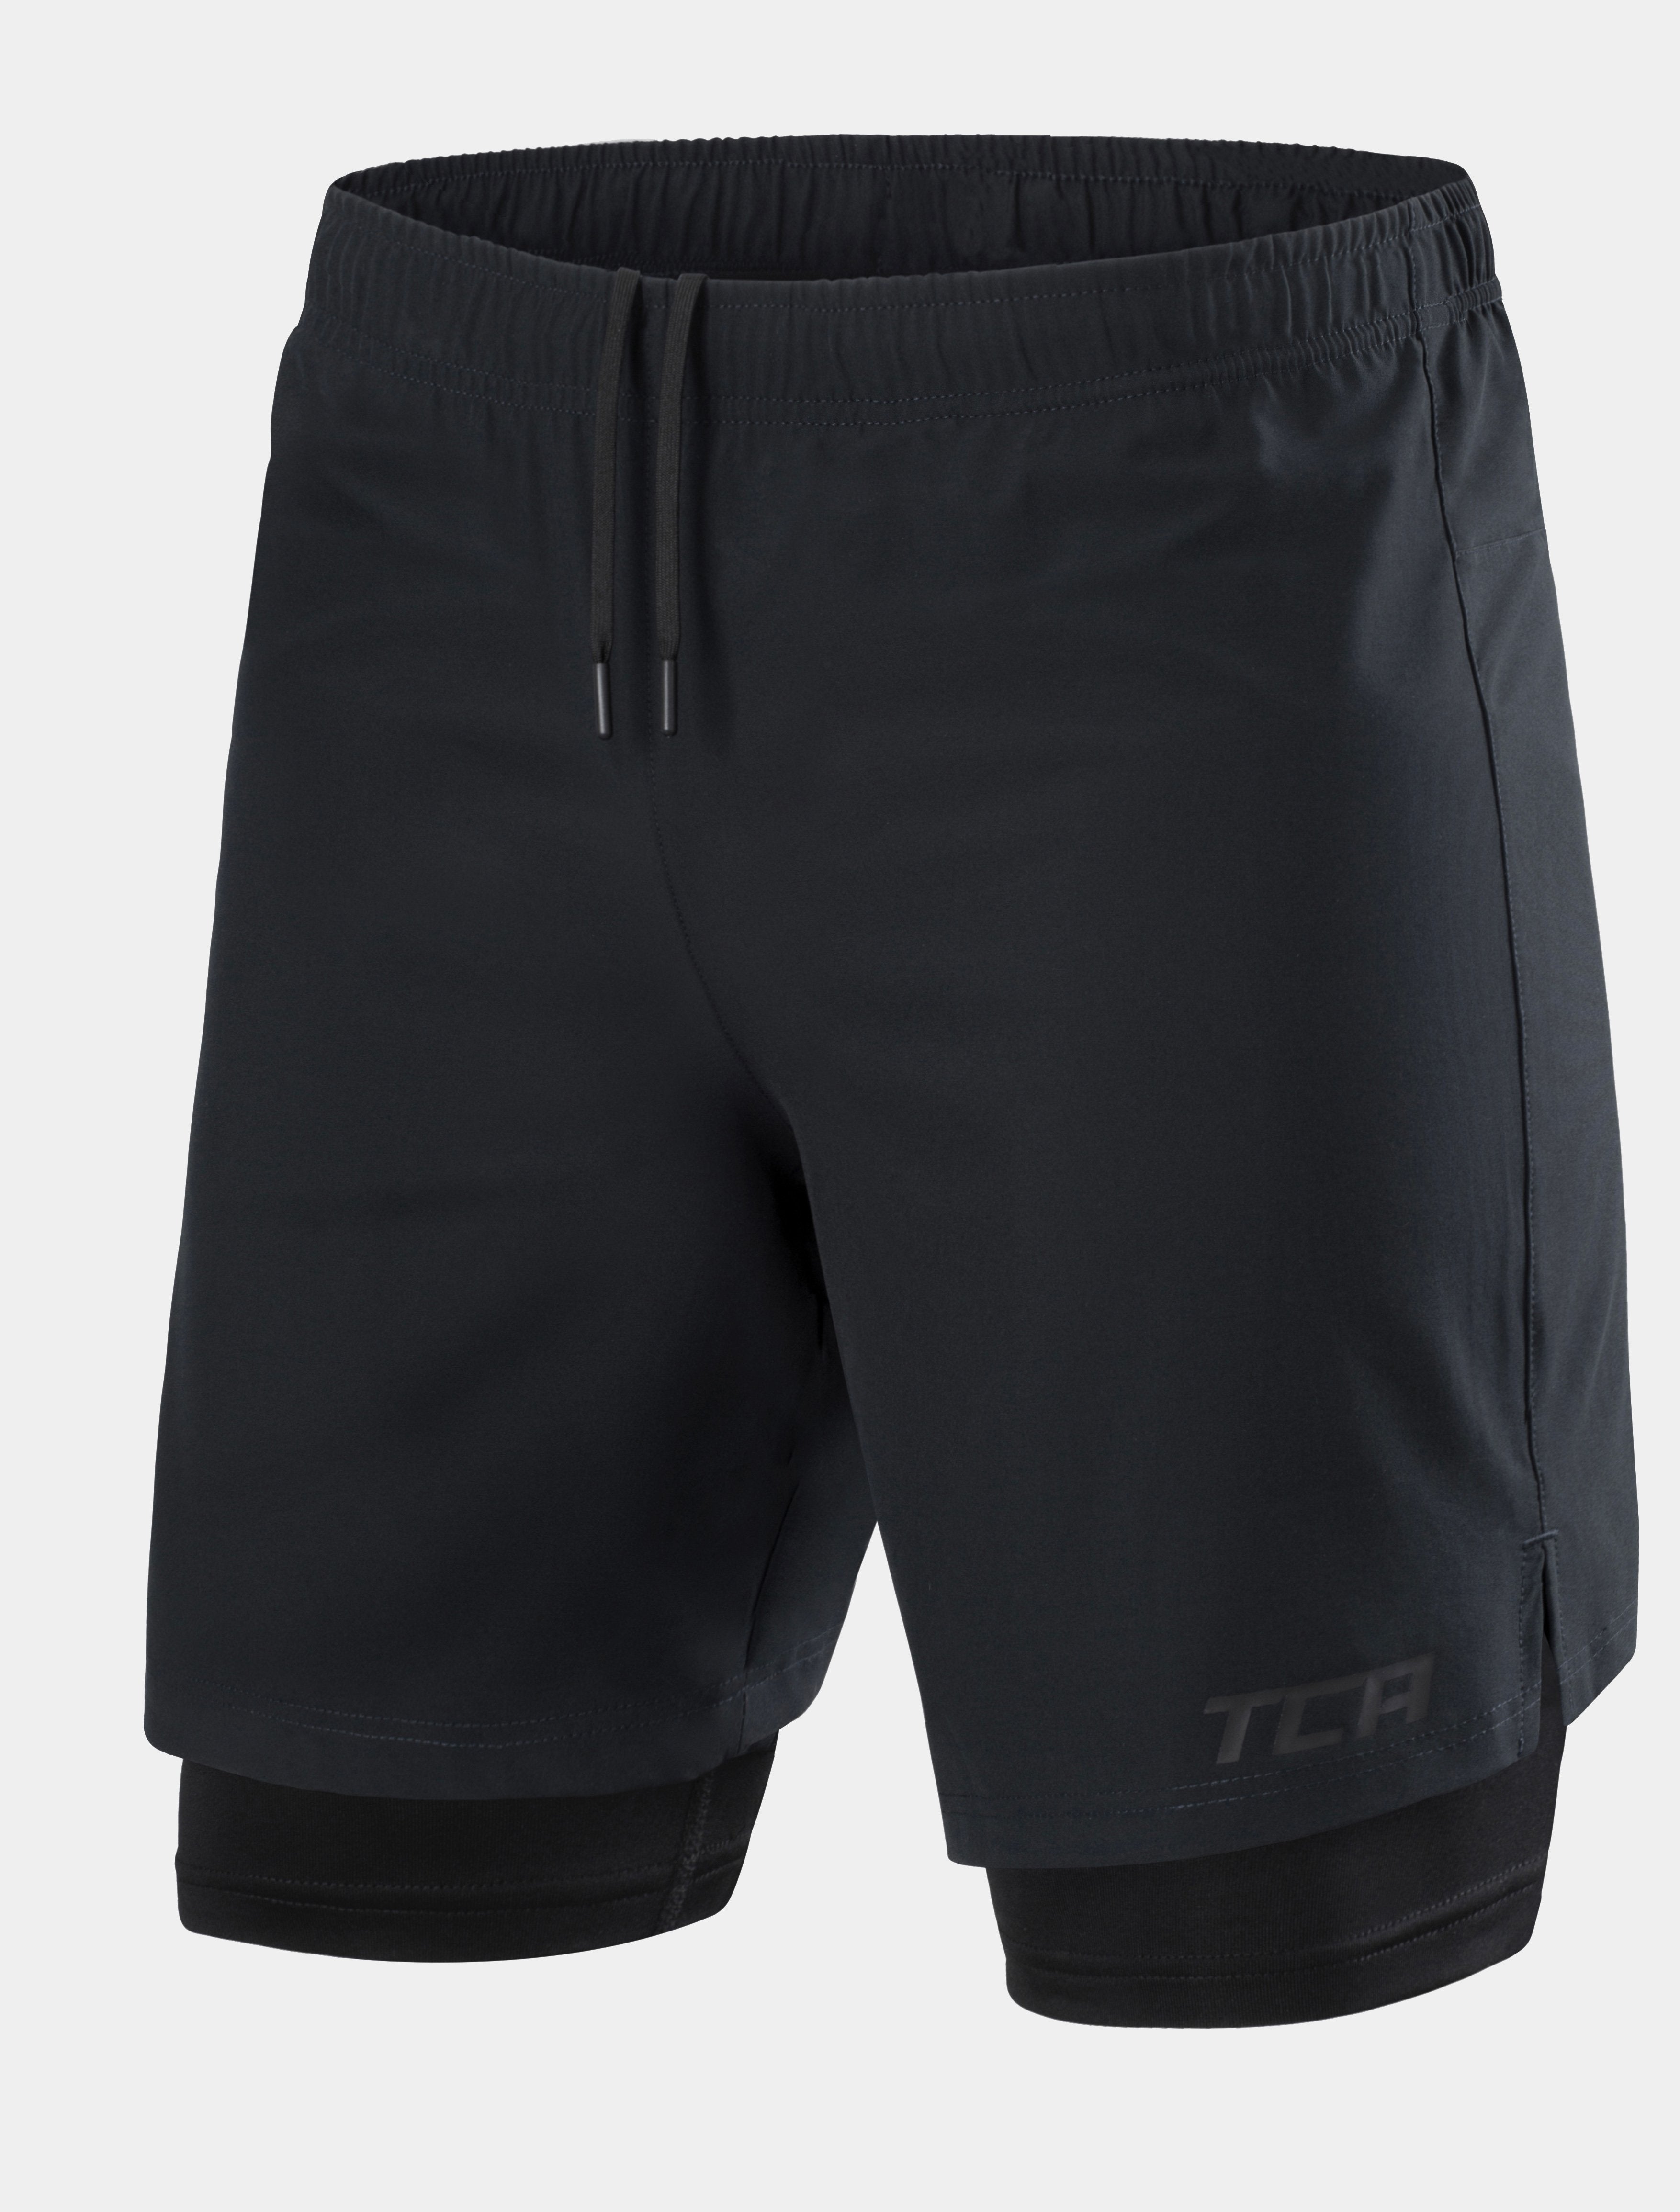 Men's Ultra 2-in-1 Running Short with Zip Pockets - Anthracite